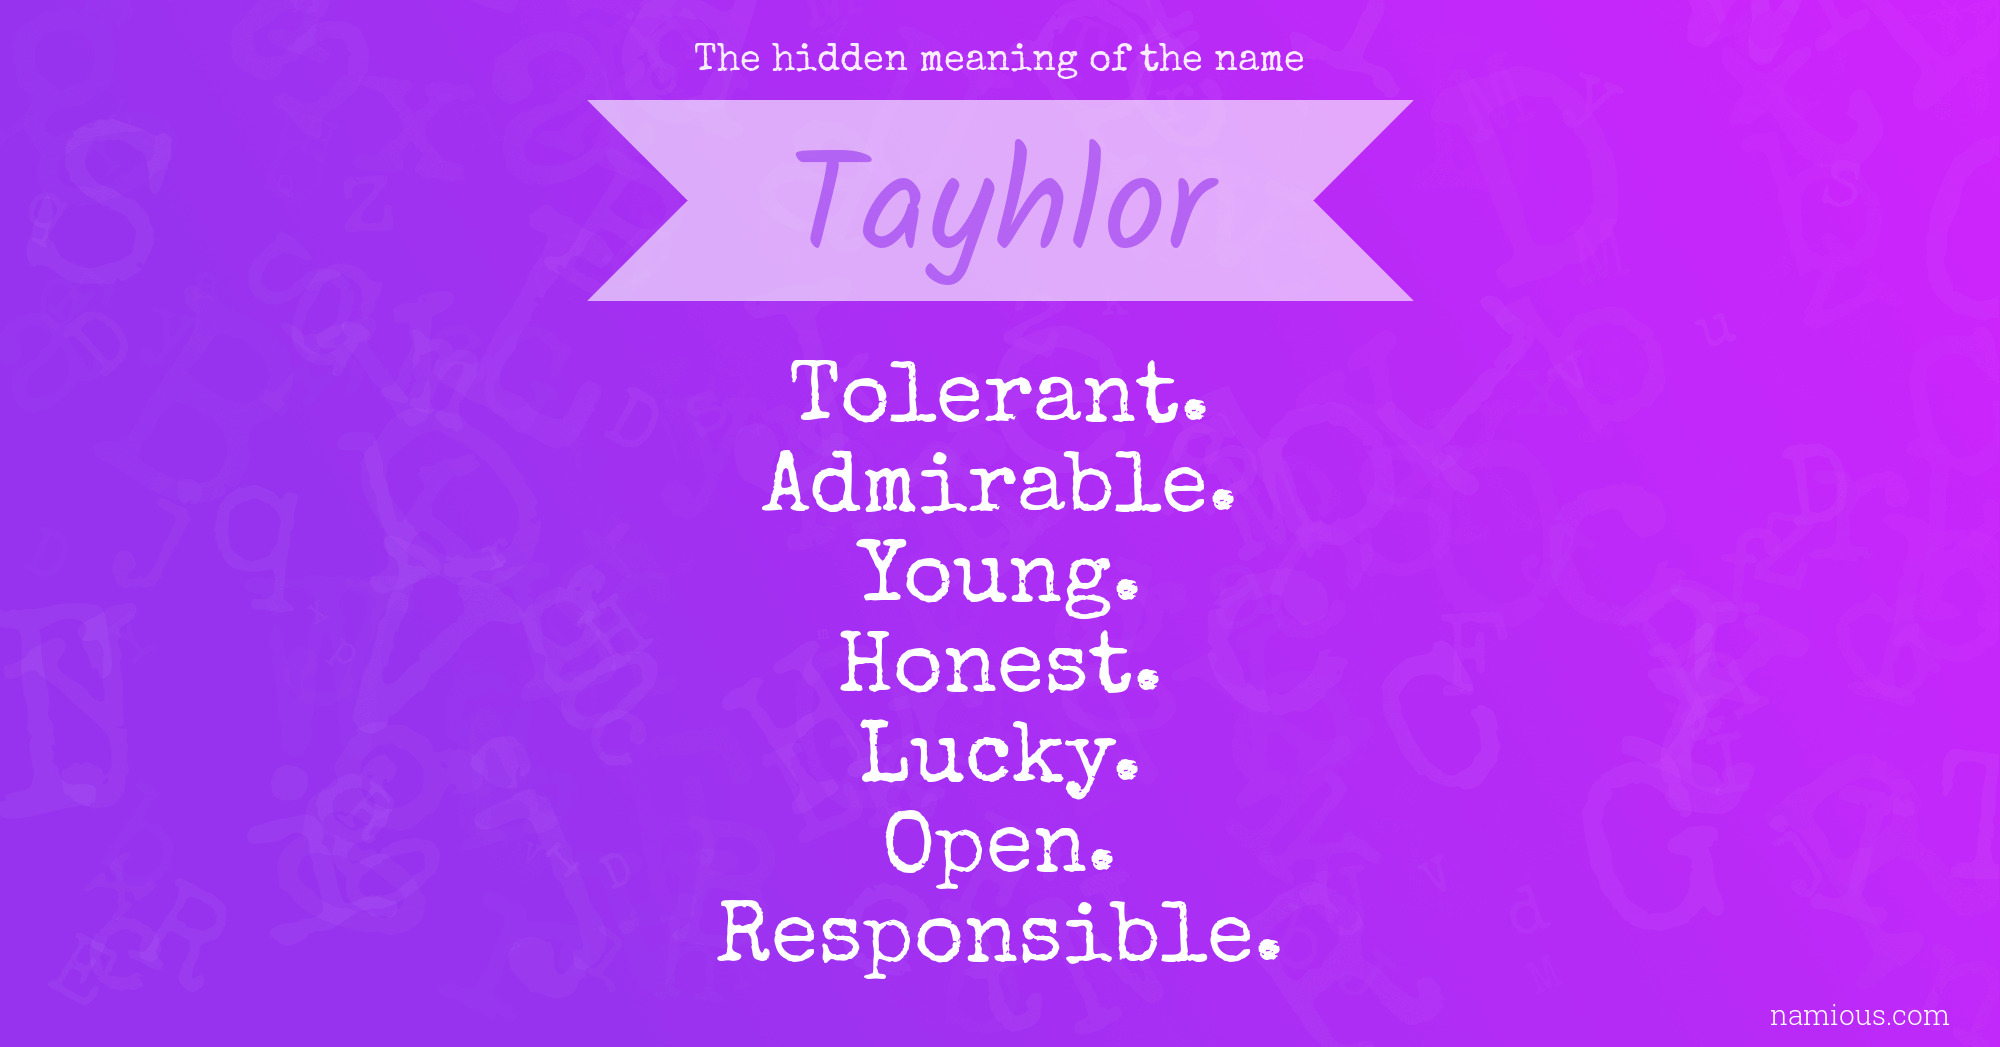 The hidden meaning of the name Tayhlor